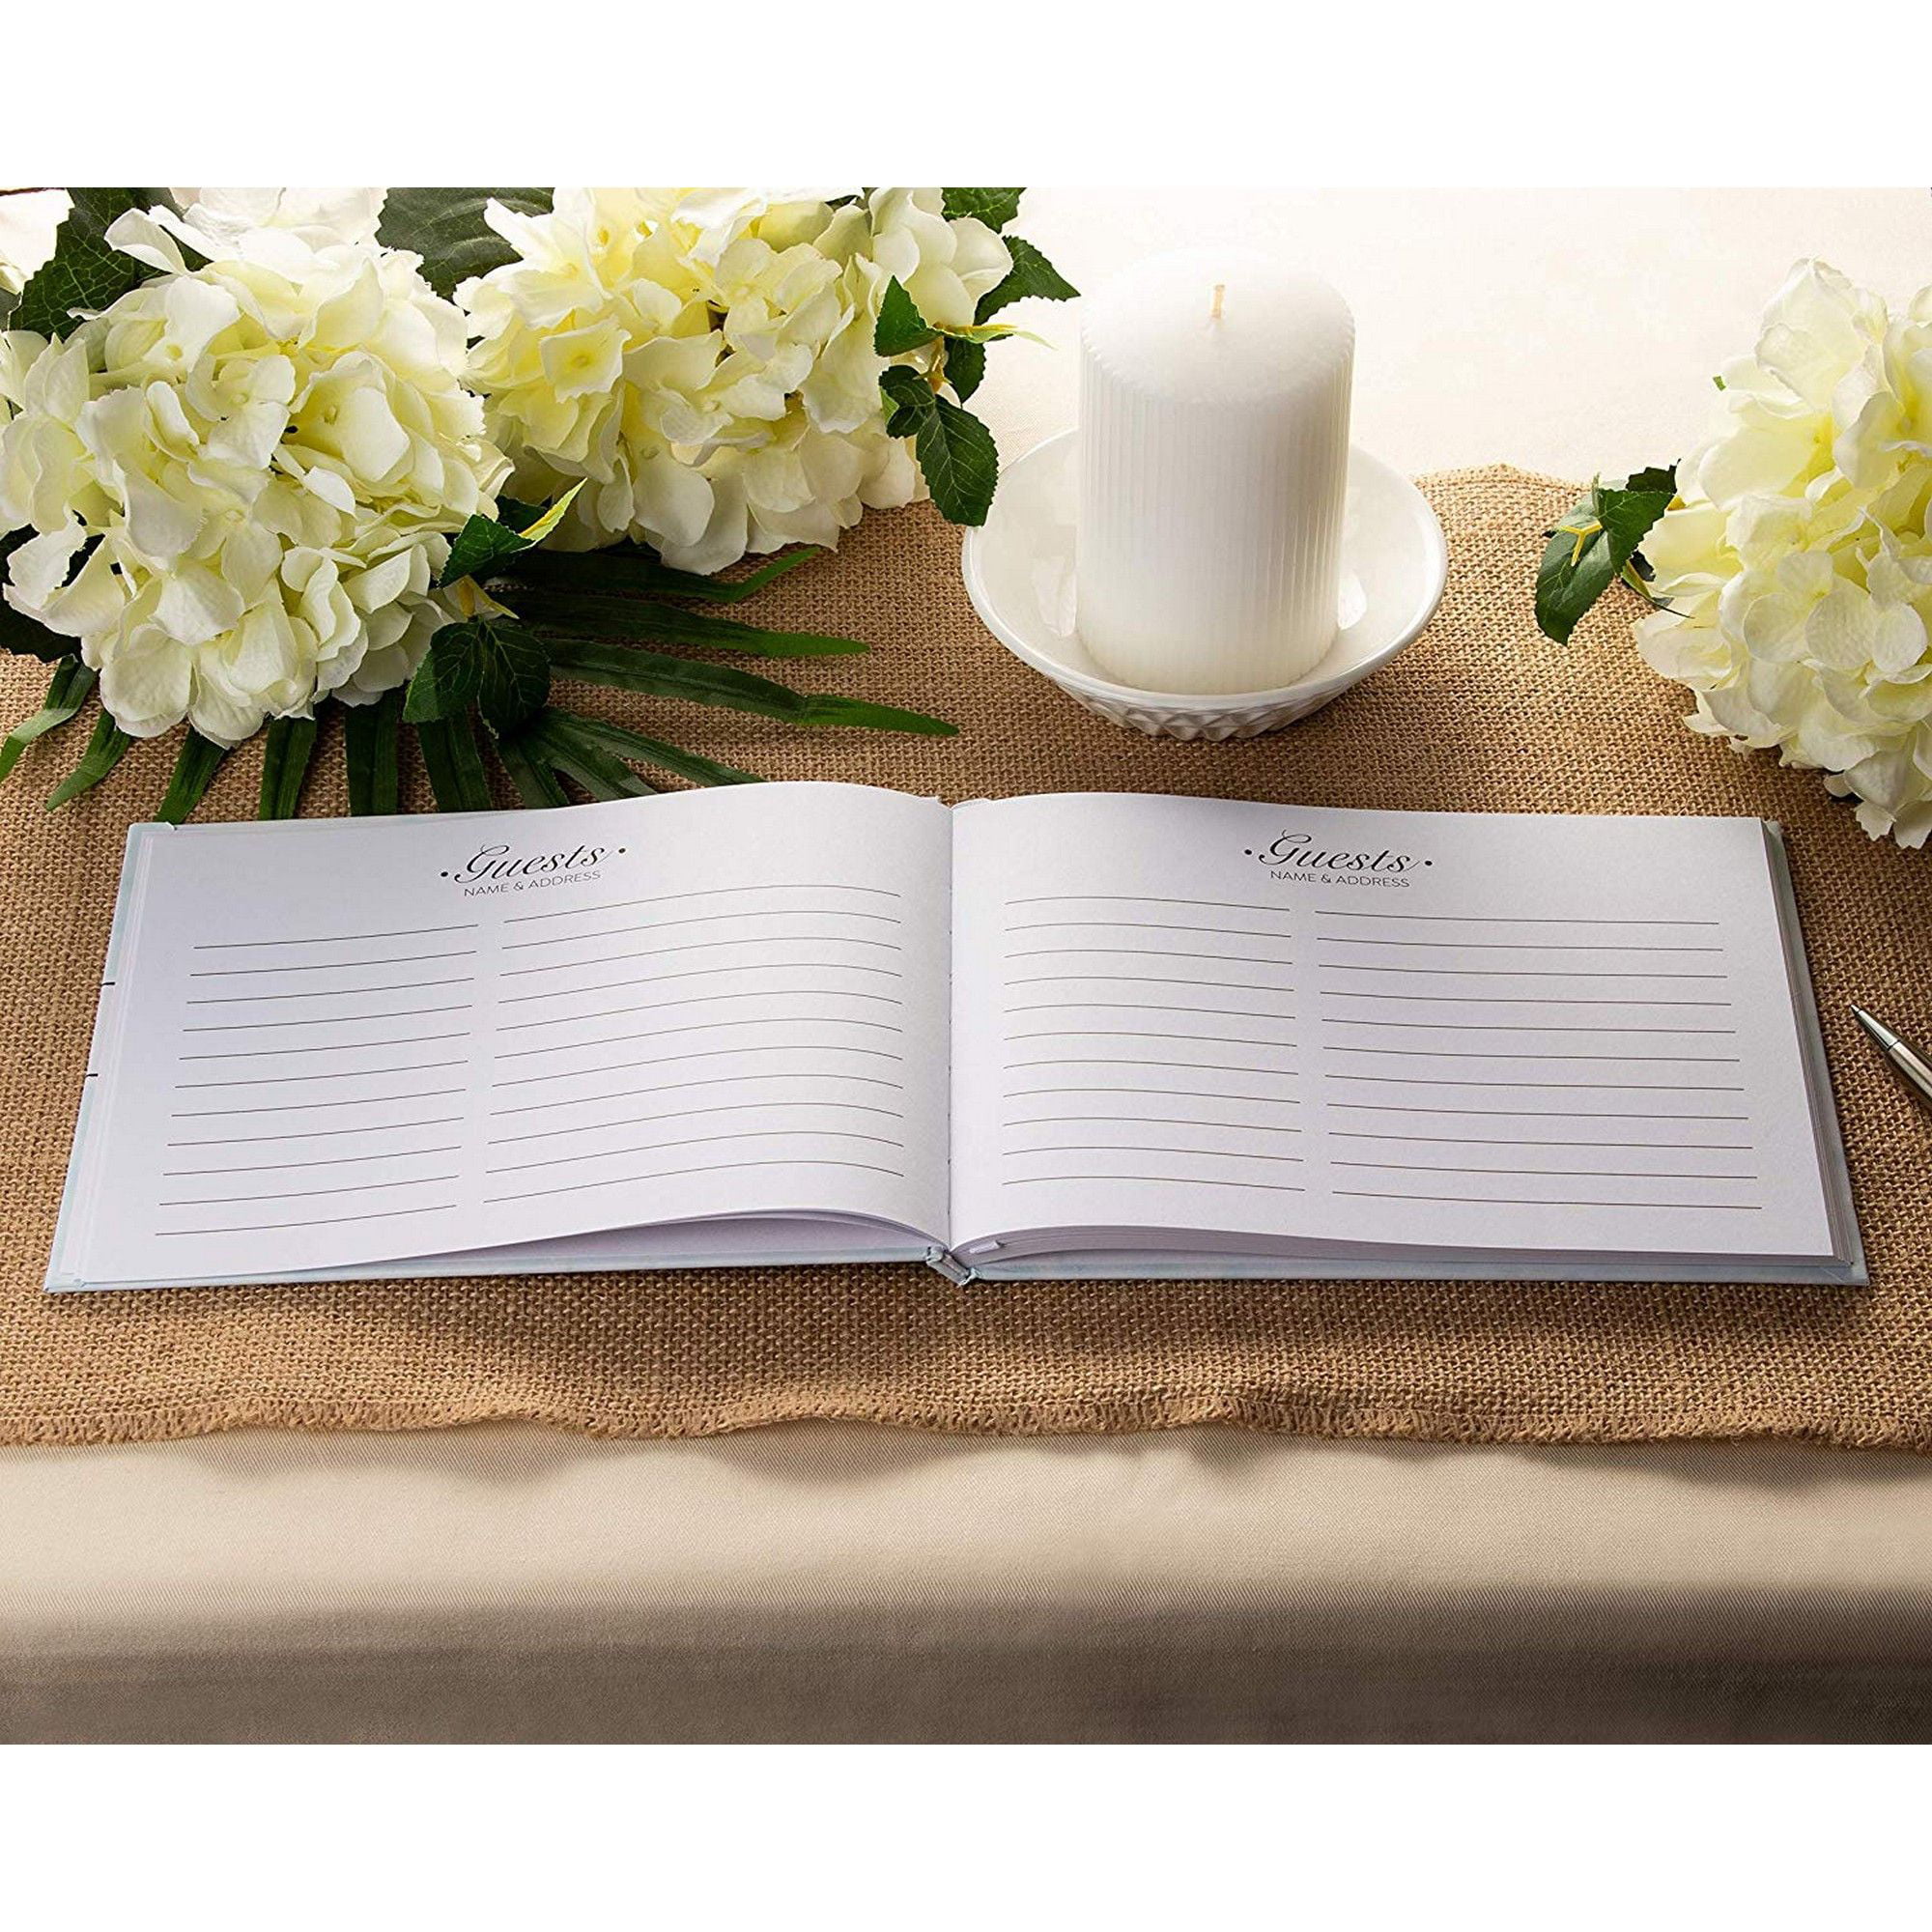 Guest Book 8.3 x 6.25 x 0.45 Inches Baby Shower Graduation Party Floral Print Design 56-Sheet Wedding Guest Book for Business Banquet